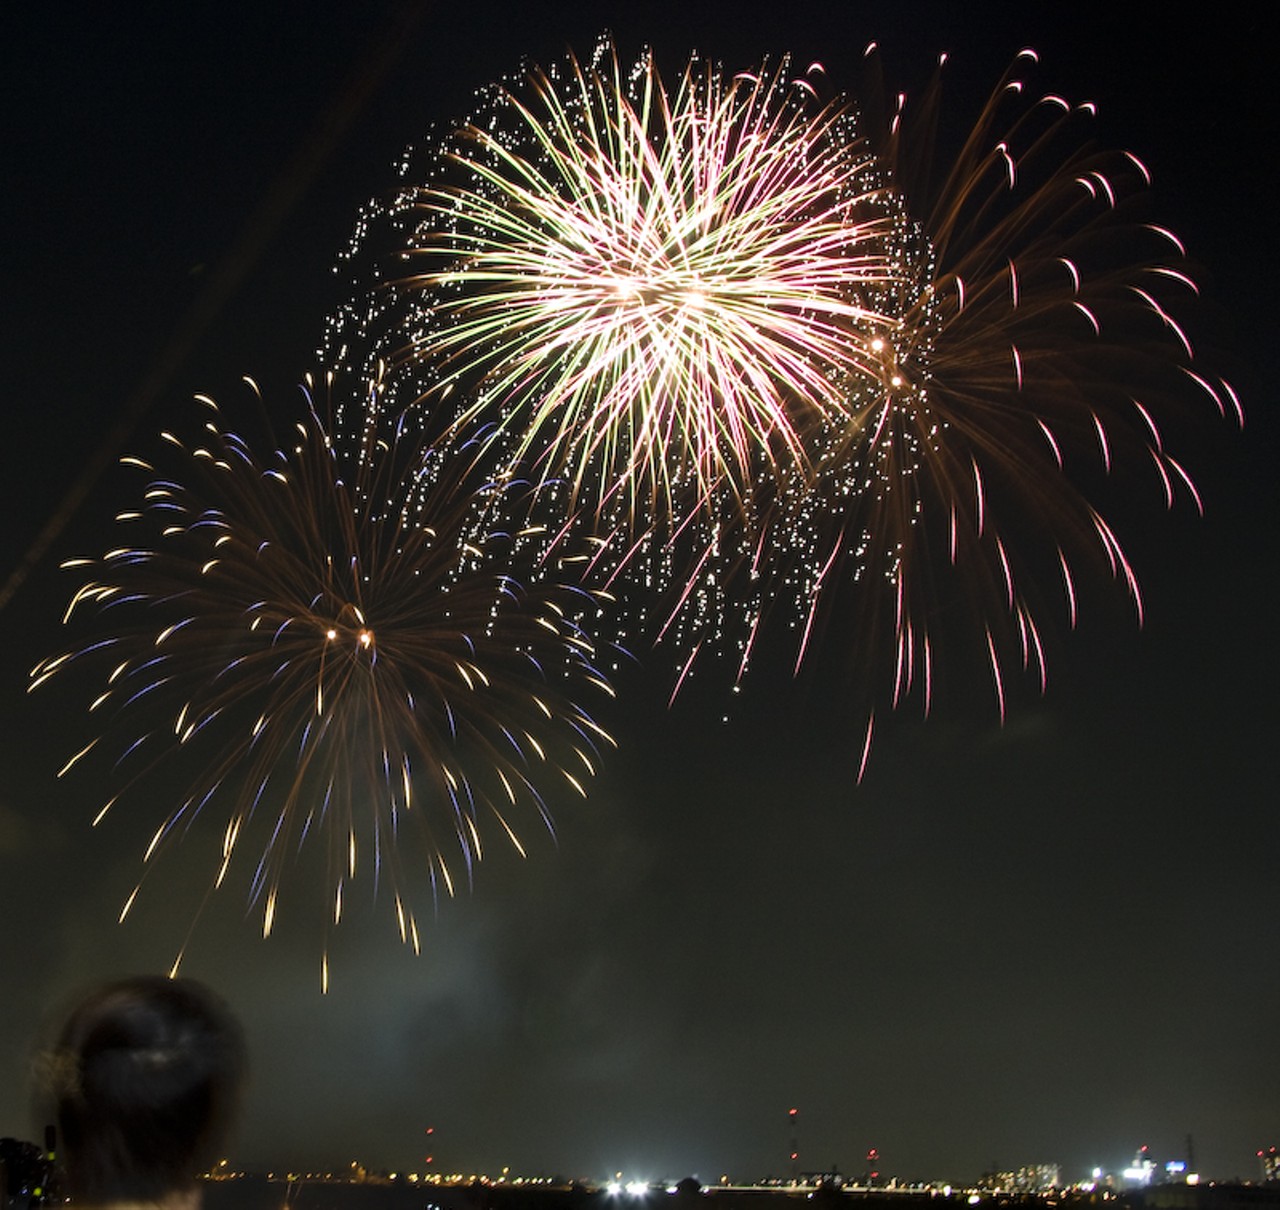 Kirkwood
Where: Kirkwood Park (111 S Geyer Road)
When: Monday, July 4 at 5 p.m.
Free to attend, Kirkwood’s Fourth of July festivities include live music, food trucks and a fireworks show. If it rains, the event will be moved to the next day (July 5.)